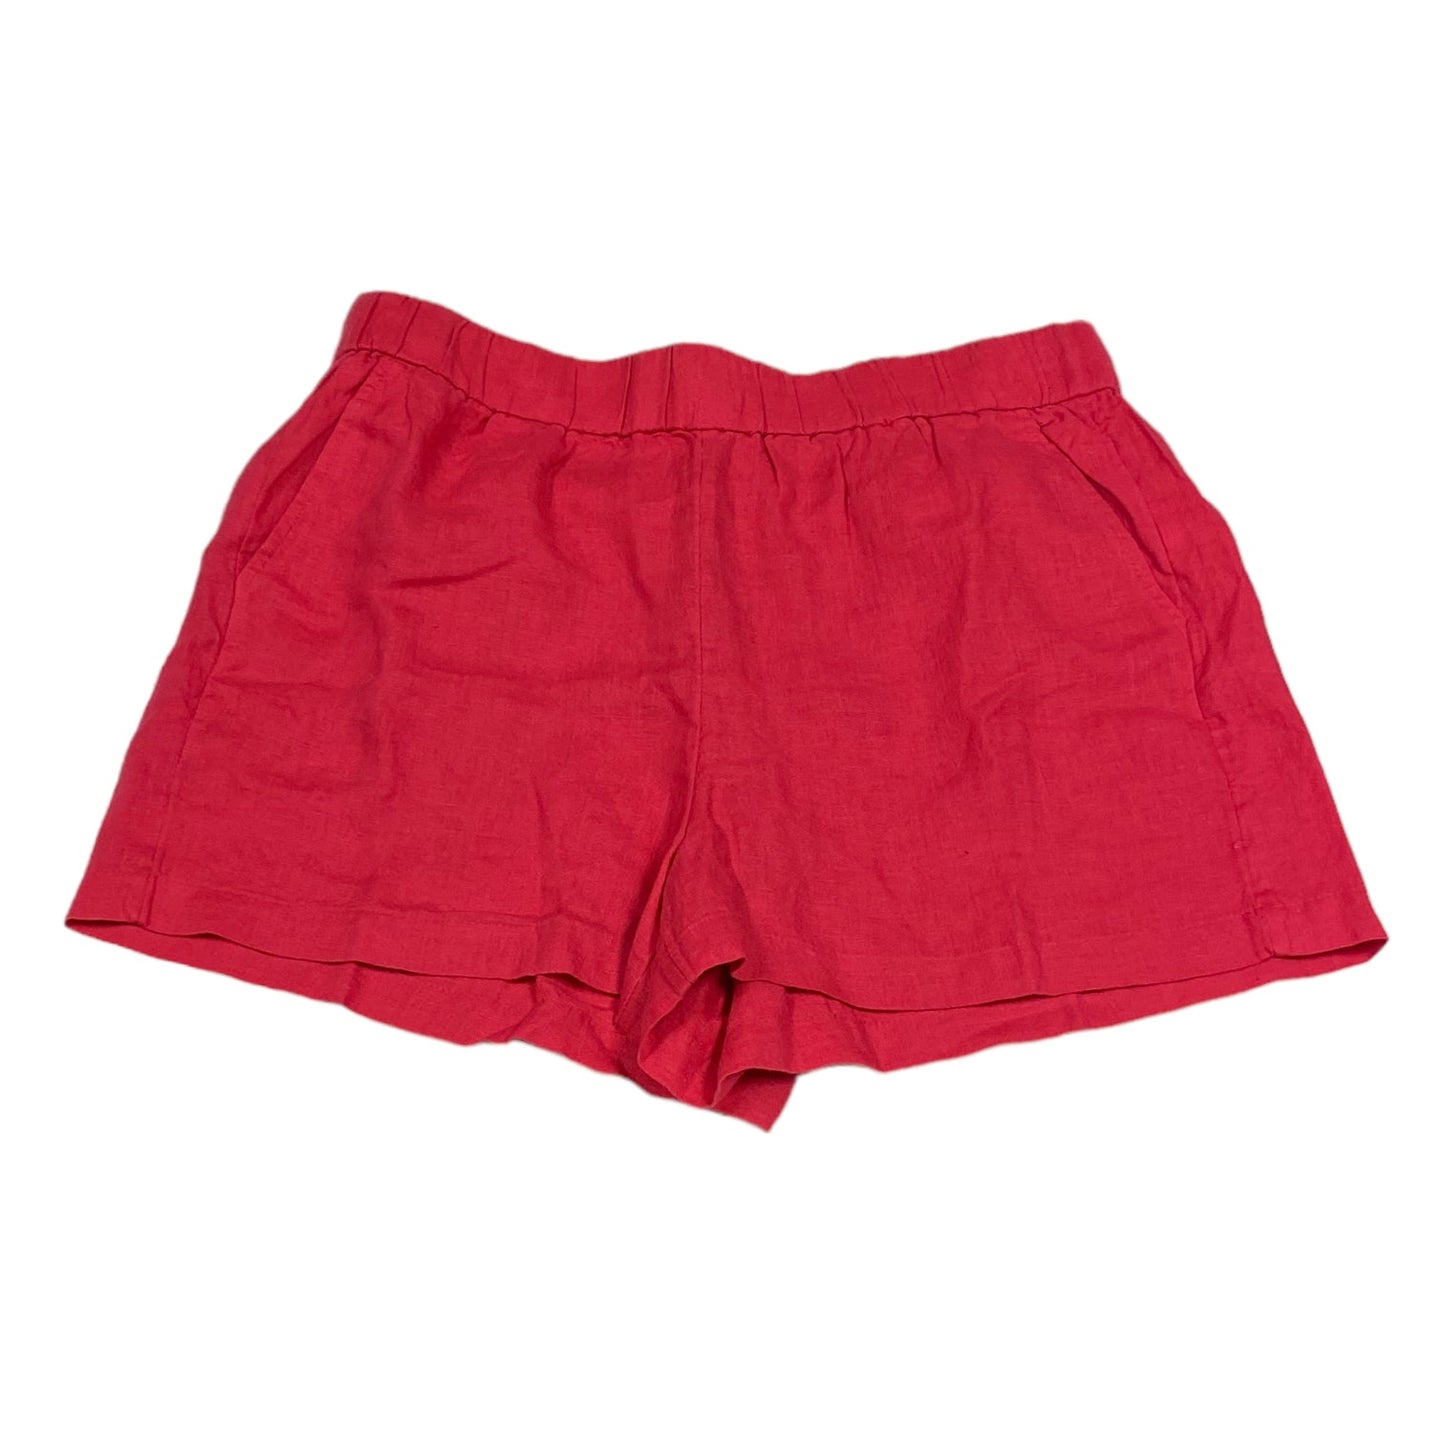 Shorts By J. Crew  Size: M